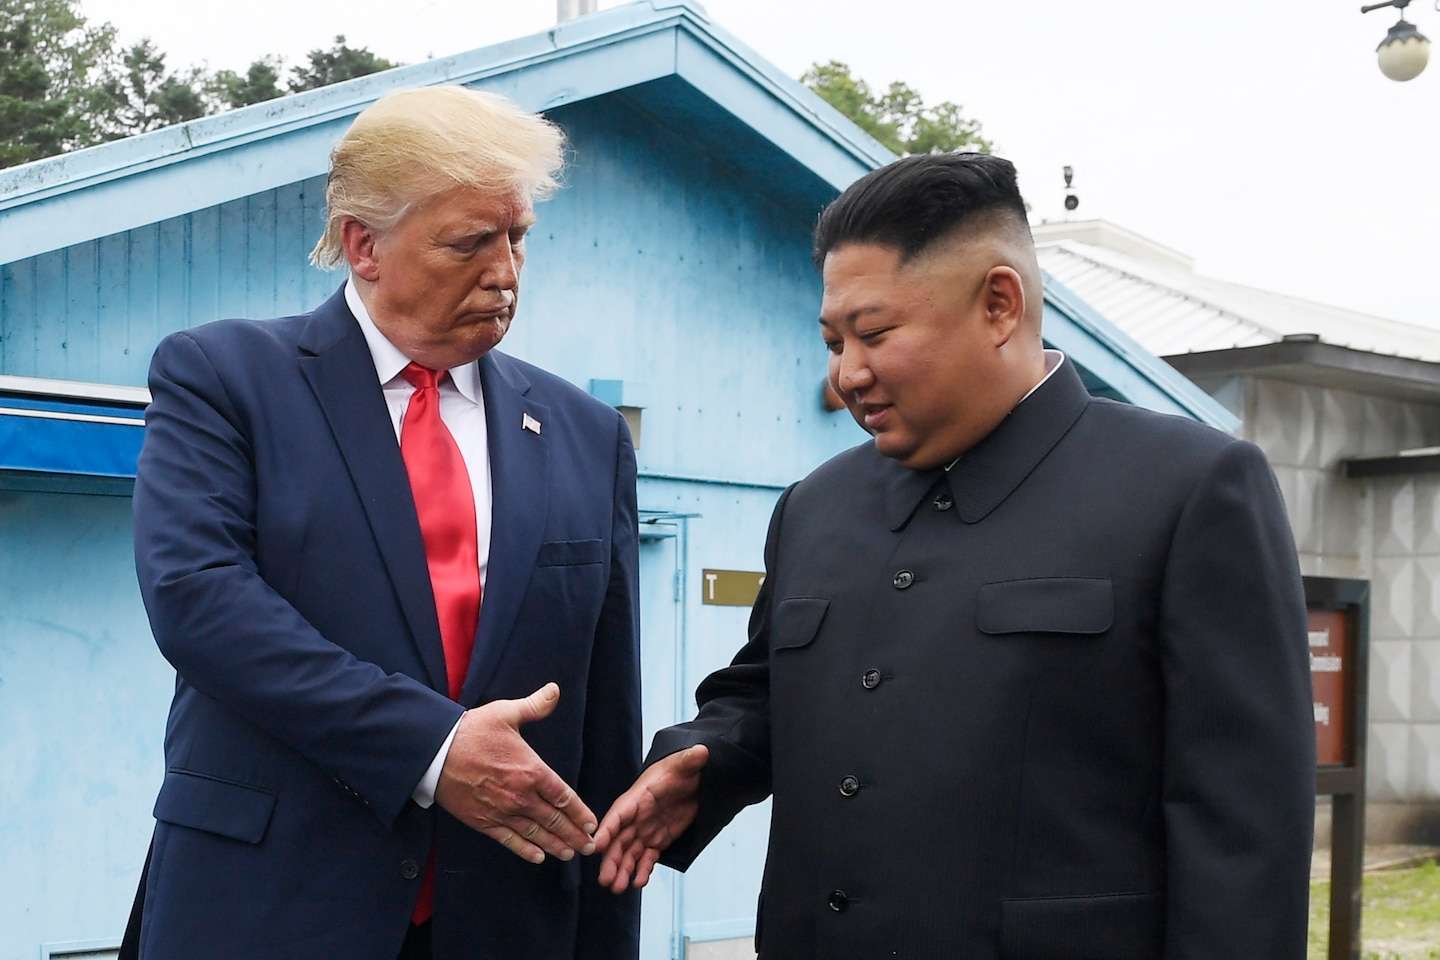 How Trump’s ‘love letters’ with Kim Jong Un could cost him